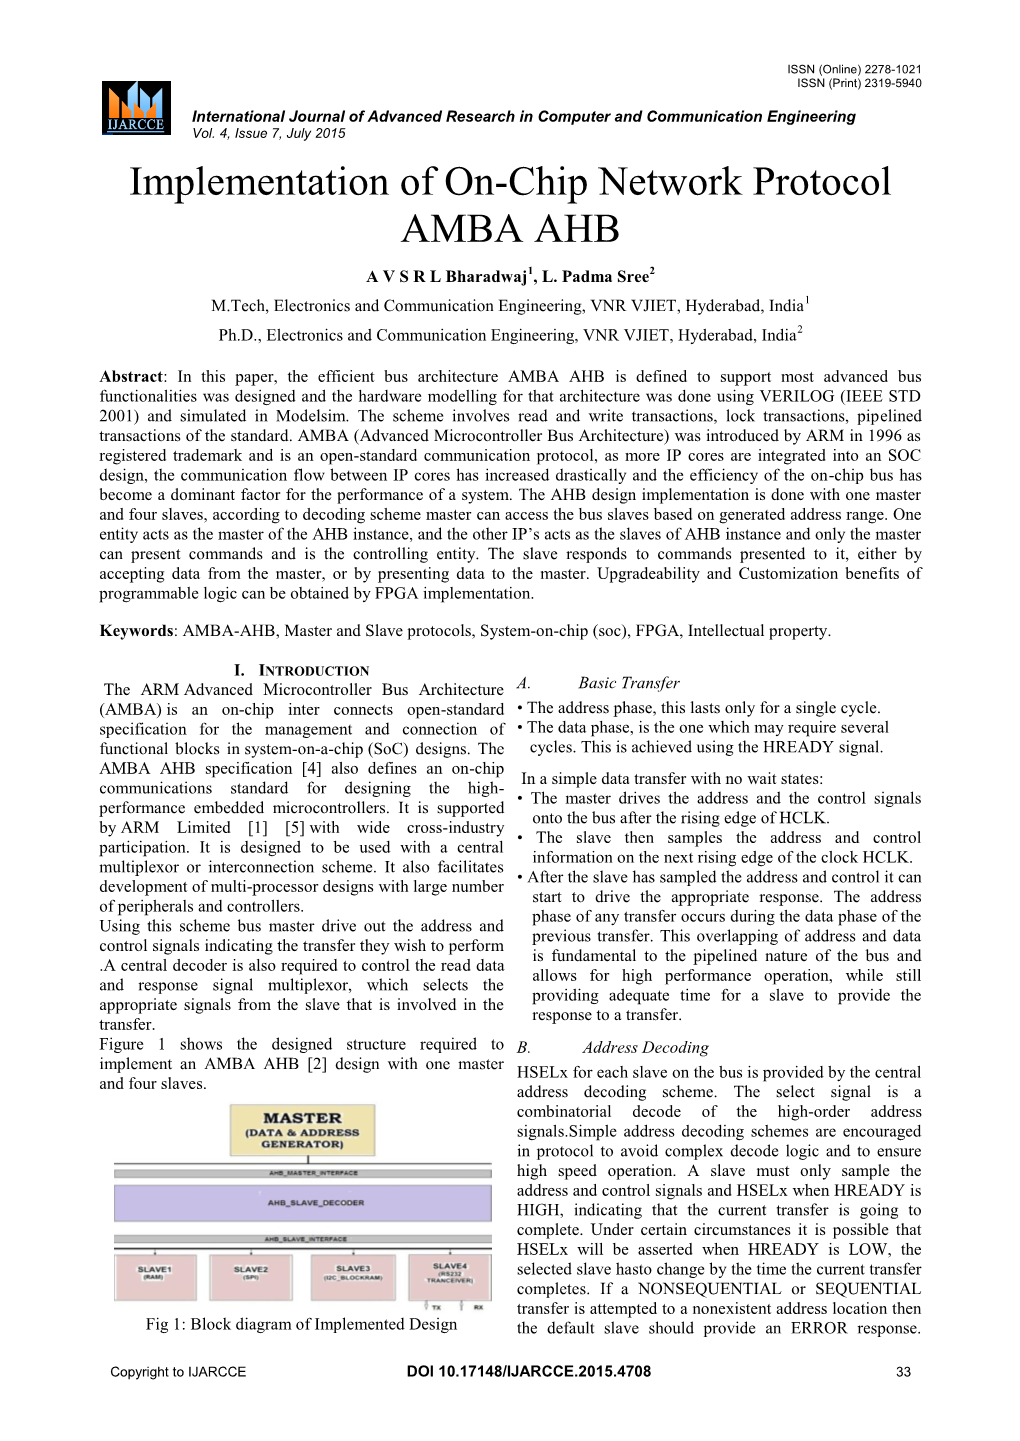 Implementation of On-Chip Network Protocol AMBA AHB